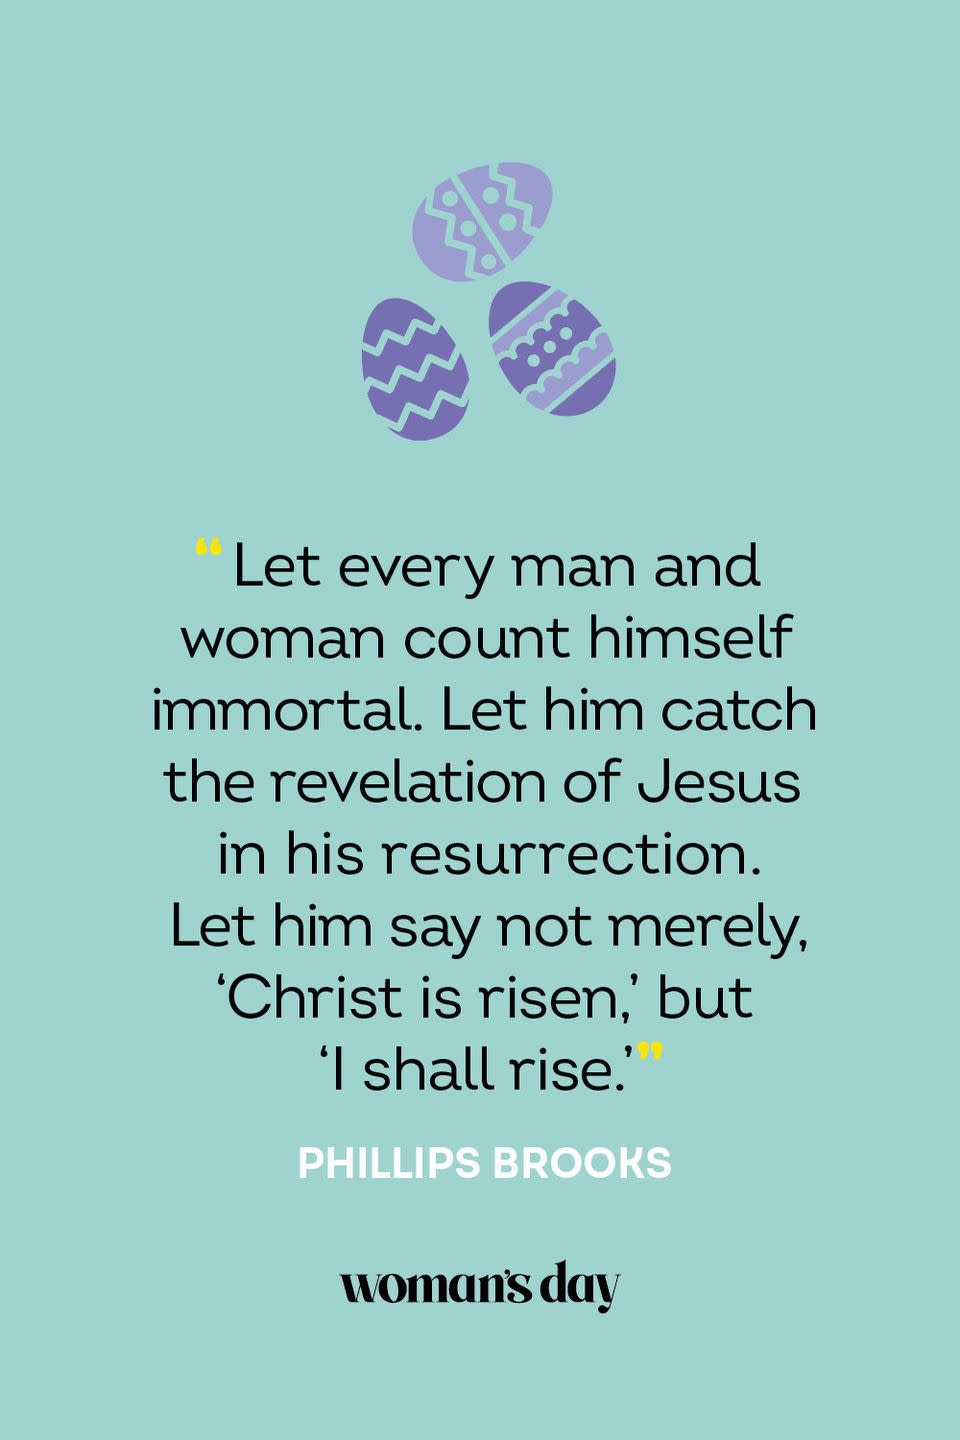 <p>“Let every man and woman count himself immortal. Let him catch the revelation of Jesus in his resurrection. Let him say not merely, 'Christ is risen,' but 'I shall rise.'” — Phillips Brooks</p>